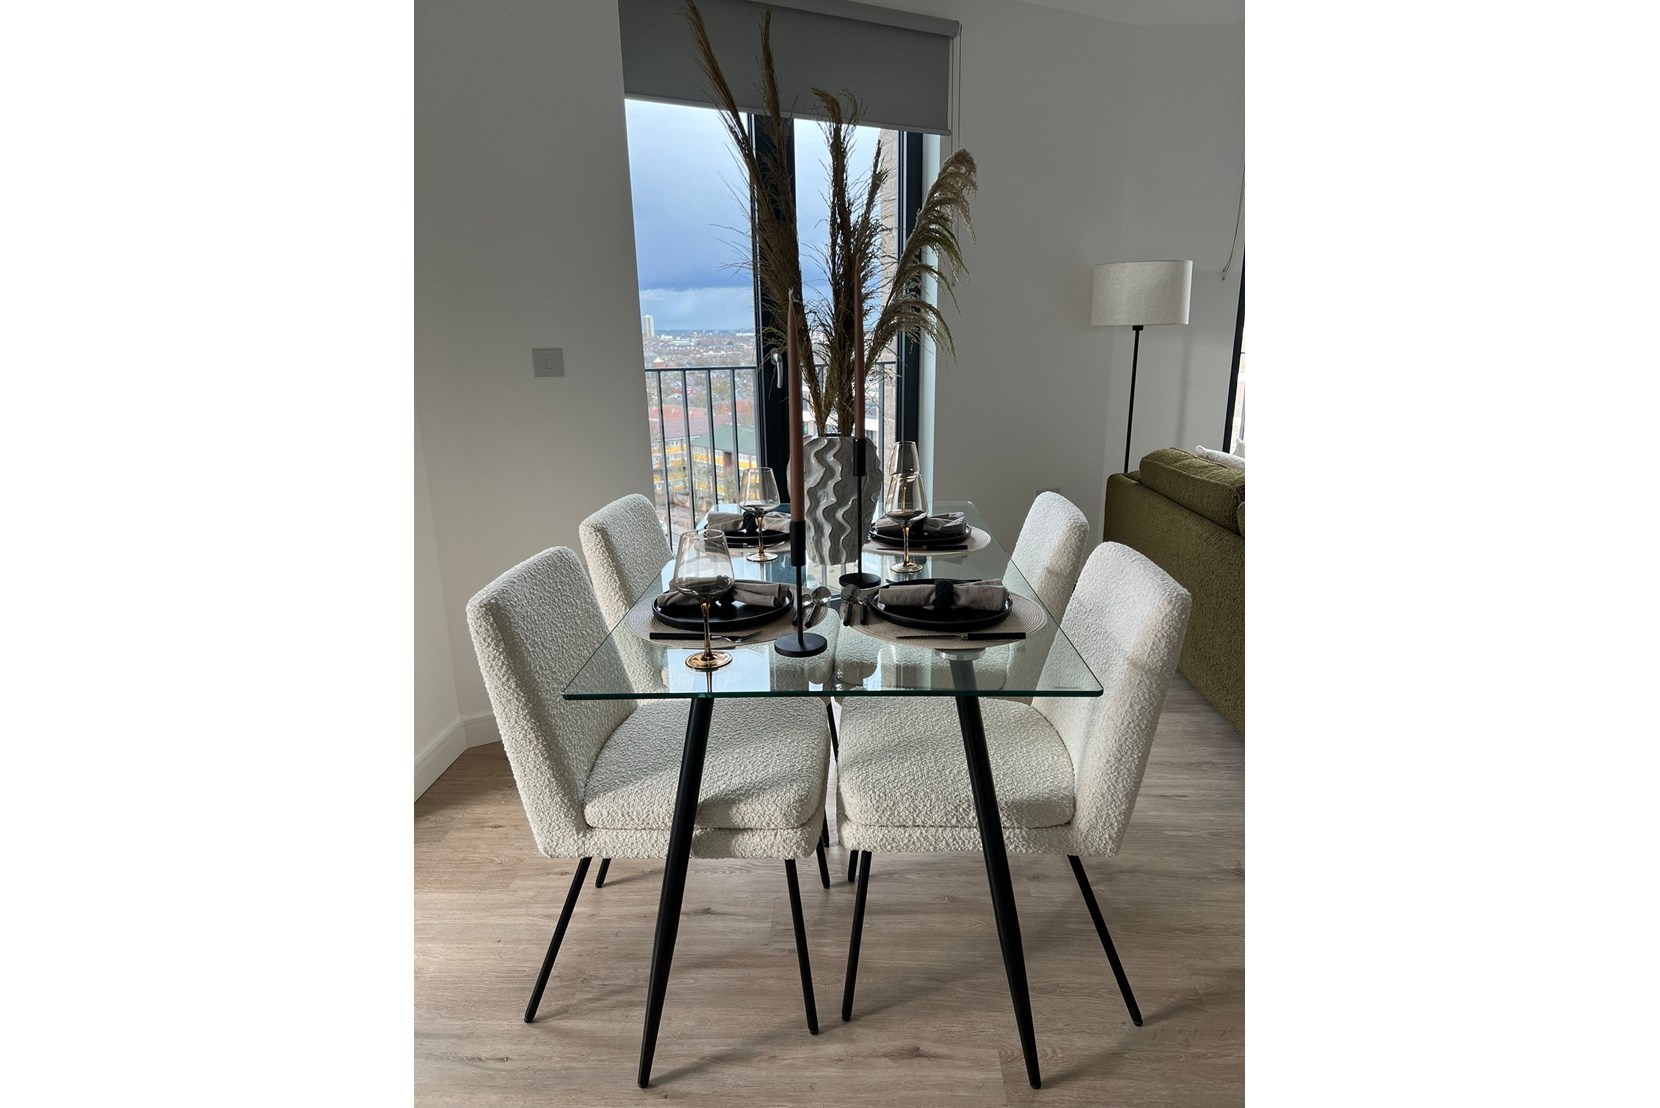 Apartments to Rent by Populo Living at Plaistow Hub, Newham, E13, dining area